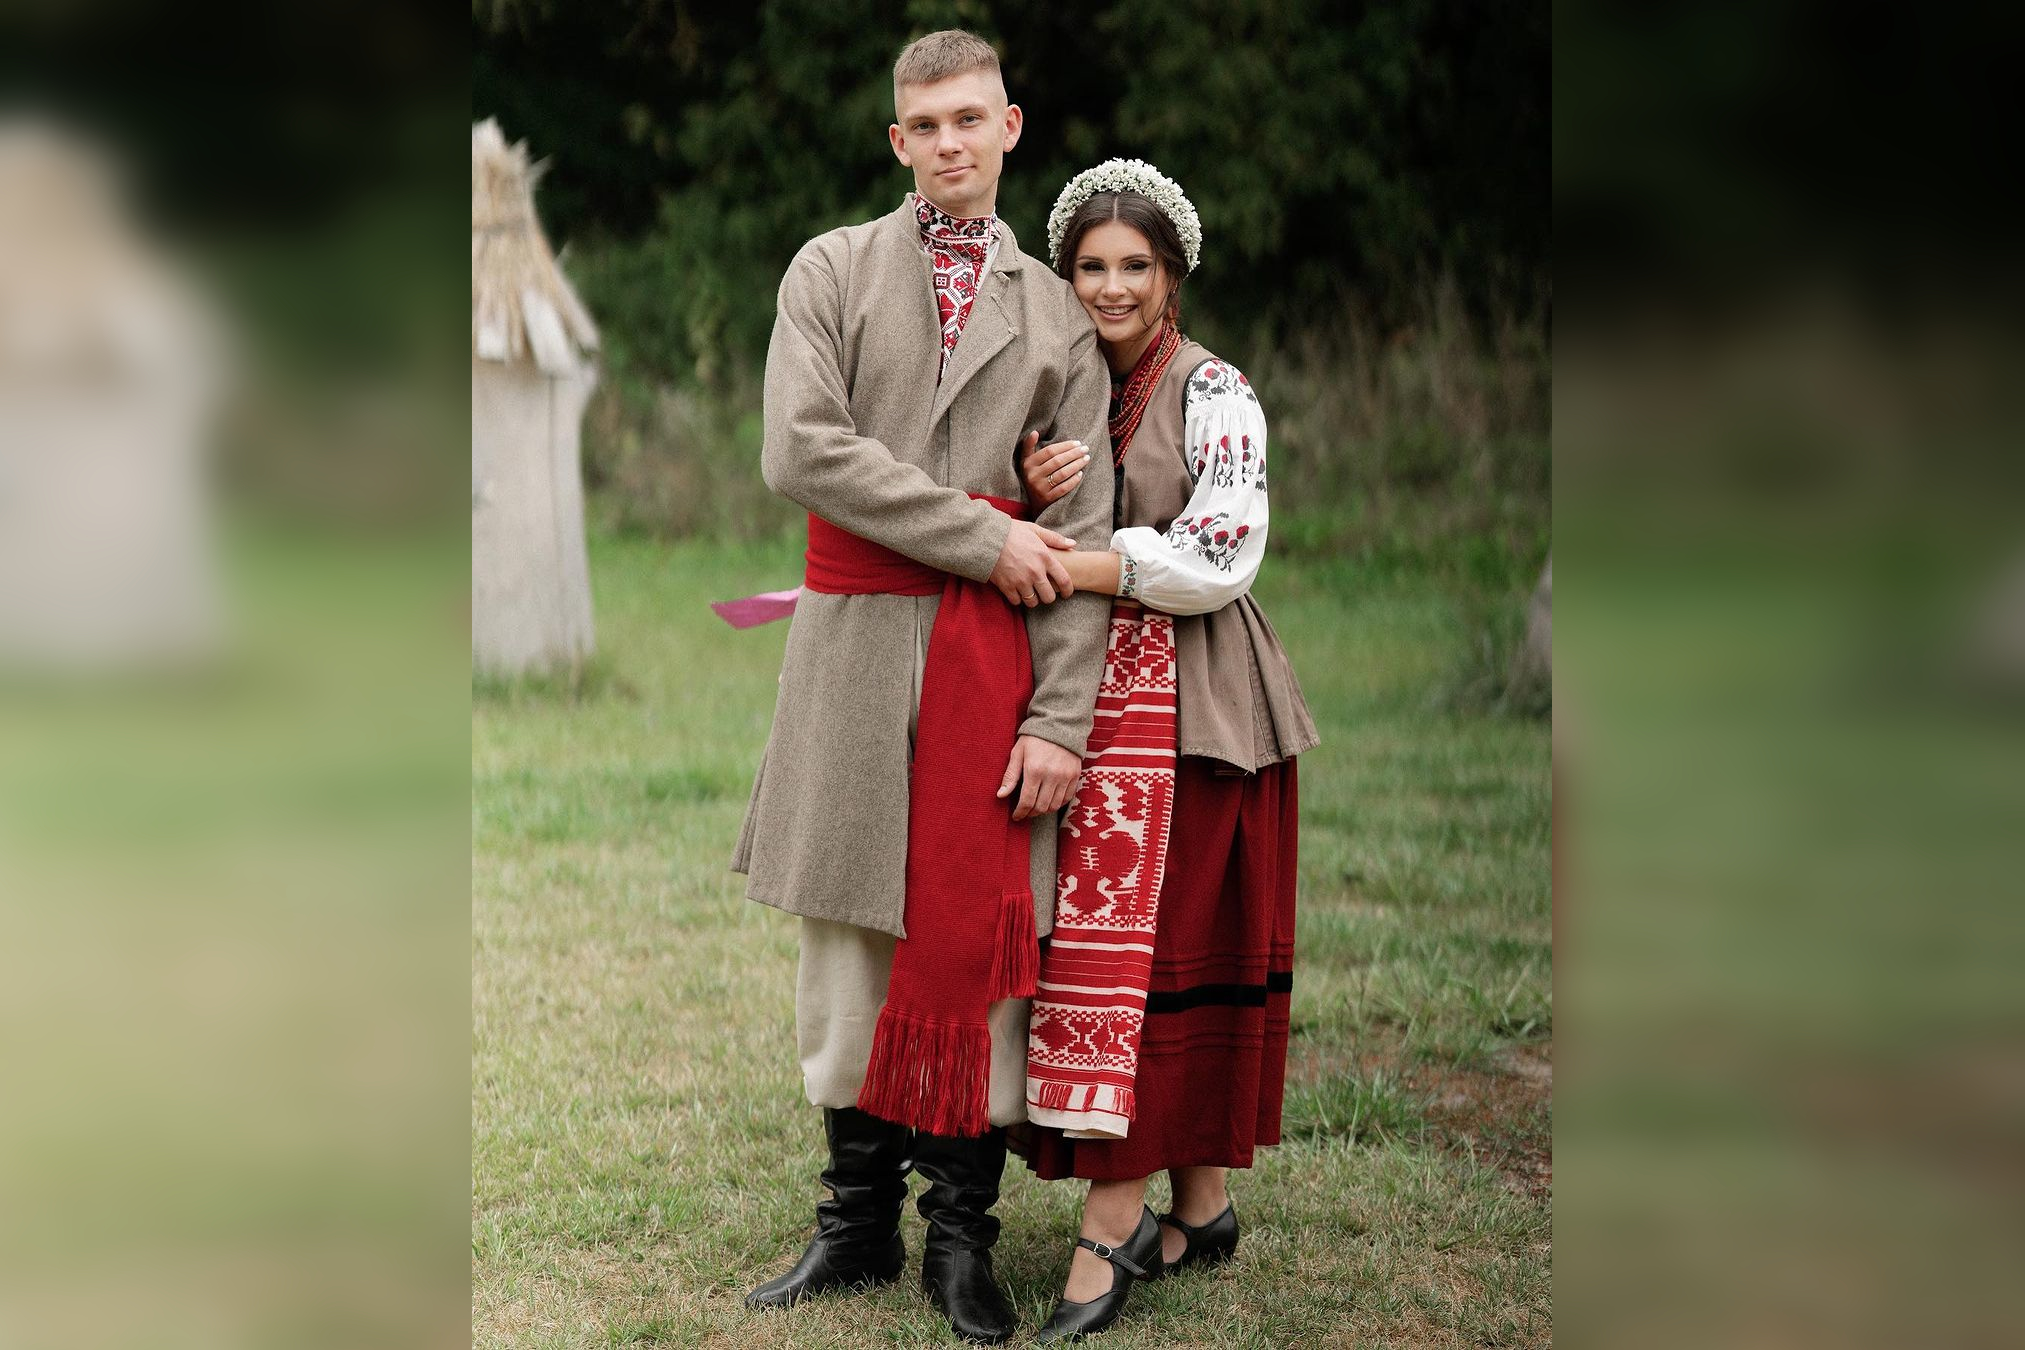 25 Most Amazing Traditional Wedding Looks From Around the World